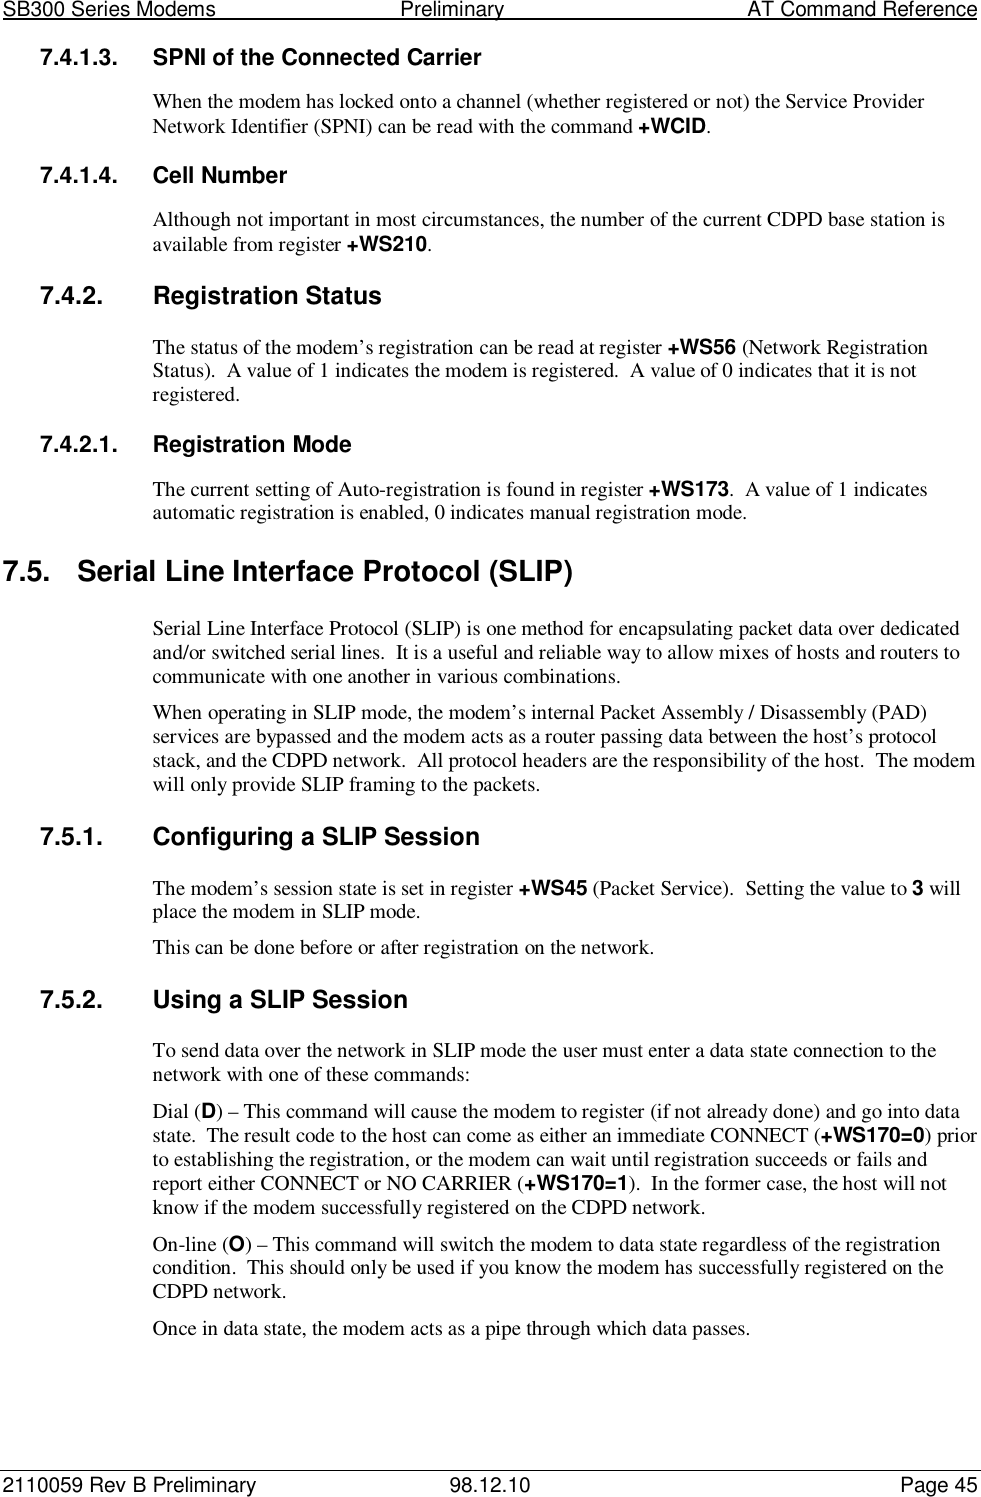 SB300 Series Modems                                  Preliminary                                         AT Command Reference2110059 Rev B Preliminary 98.12.10 Page 457.4.1.3.  SPNI of the Connected CarrierWhen the modem has locked onto a channel (whether registered or not) the Service ProviderNetwork Identifier (SPNI) can be read with the command +WCID.7.4.1.4. Cell NumberAlthough not important in most circumstances, the number of the current CDPD base station isavailable from register +WS210.7.4.2. Registration StatusThe status of the modem’s registration can be read at register +WS56 (Network RegistrationStatus).  A value of 1 indicates the modem is registered.  A value of 0 indicates that it is notregistered.7.4.2.1. Registration ModeThe current setting of Auto-registration is found in register +WS173.  A value of 1 indicatesautomatic registration is enabled, 0 indicates manual registration mode.7.5.  Serial Line Interface Protocol (SLIP)Serial Line Interface Protocol (SLIP) is one method for encapsulating packet data over dedicatedand/or switched serial lines.  It is a useful and reliable way to allow mixes of hosts and routers tocommunicate with one another in various combinations.When operating in SLIP mode, the modem’s internal Packet Assembly / Disassembly (PAD)services are bypassed and the modem acts as a router passing data between the host’s protocolstack, and the CDPD network.  All protocol headers are the responsibility of the host.  The modemwill only provide SLIP framing to the packets.7.5.1.  Configuring a SLIP SessionThe modem’s session state is set in register +WS45 (Packet Service).  Setting the value to 3 willplace the modem in SLIP mode.This can be done before or after registration on the network.7.5.2.  Using a SLIP SessionTo send data over the network in SLIP mode the user must enter a data state connection to thenetwork with one of these commands:Dial (D) – This command will cause the modem to register (if not already done) and go into datastate.  The result code to the host can come as either an immediate CONNECT (+WS170=0) priorto establishing the registration, or the modem can wait until registration succeeds or fails andreport either CONNECT or NO CARRIER (+WS170=1).  In the former case, the host will notknow if the modem successfully registered on the CDPD network.On-line (O) – This command will switch the modem to data state regardless of the registrationcondition.  This should only be used if you know the modem has successfully registered on theCDPD network.Once in data state, the modem acts as a pipe through which data passes.